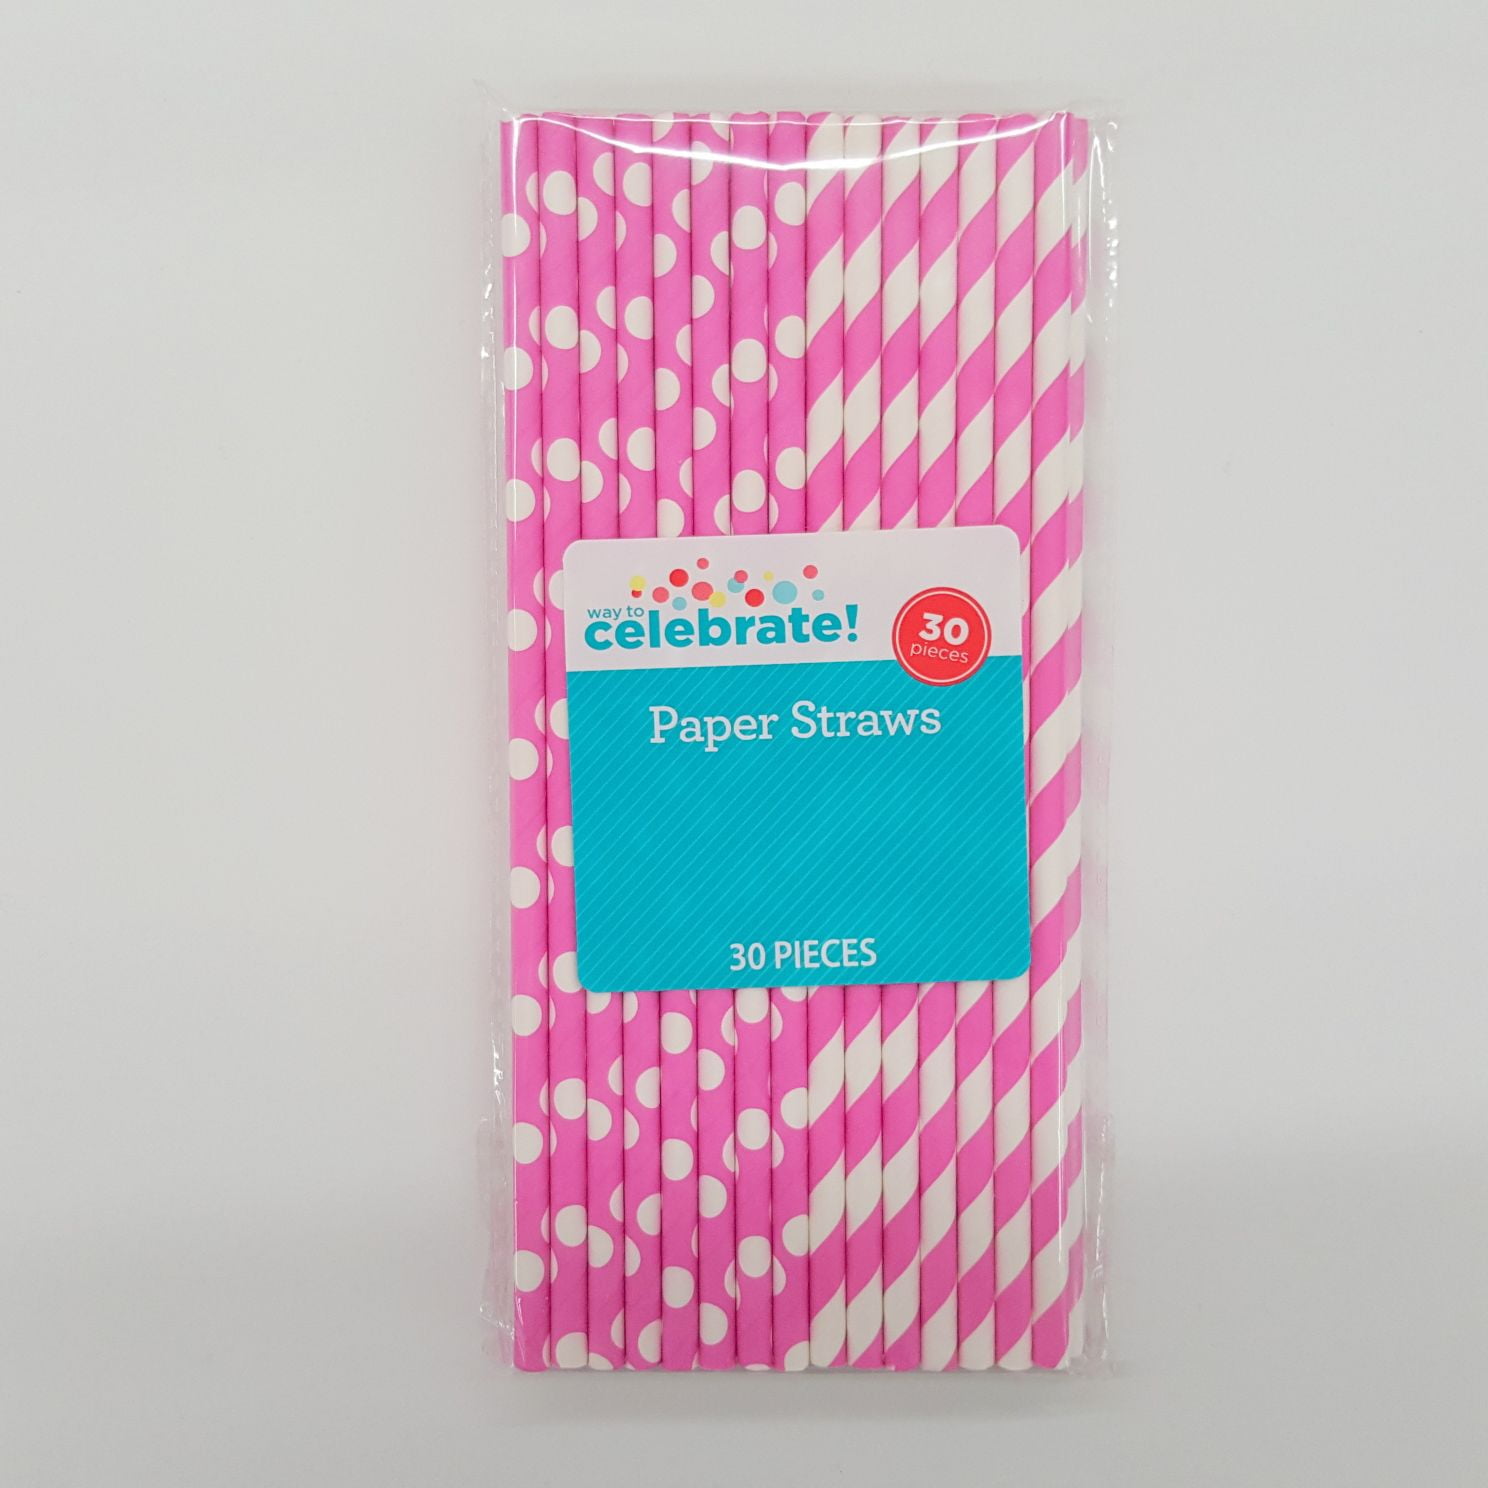 Way to Celebrate! Neon Pink Polka Dot & Striped Paper Straws, 30 Count